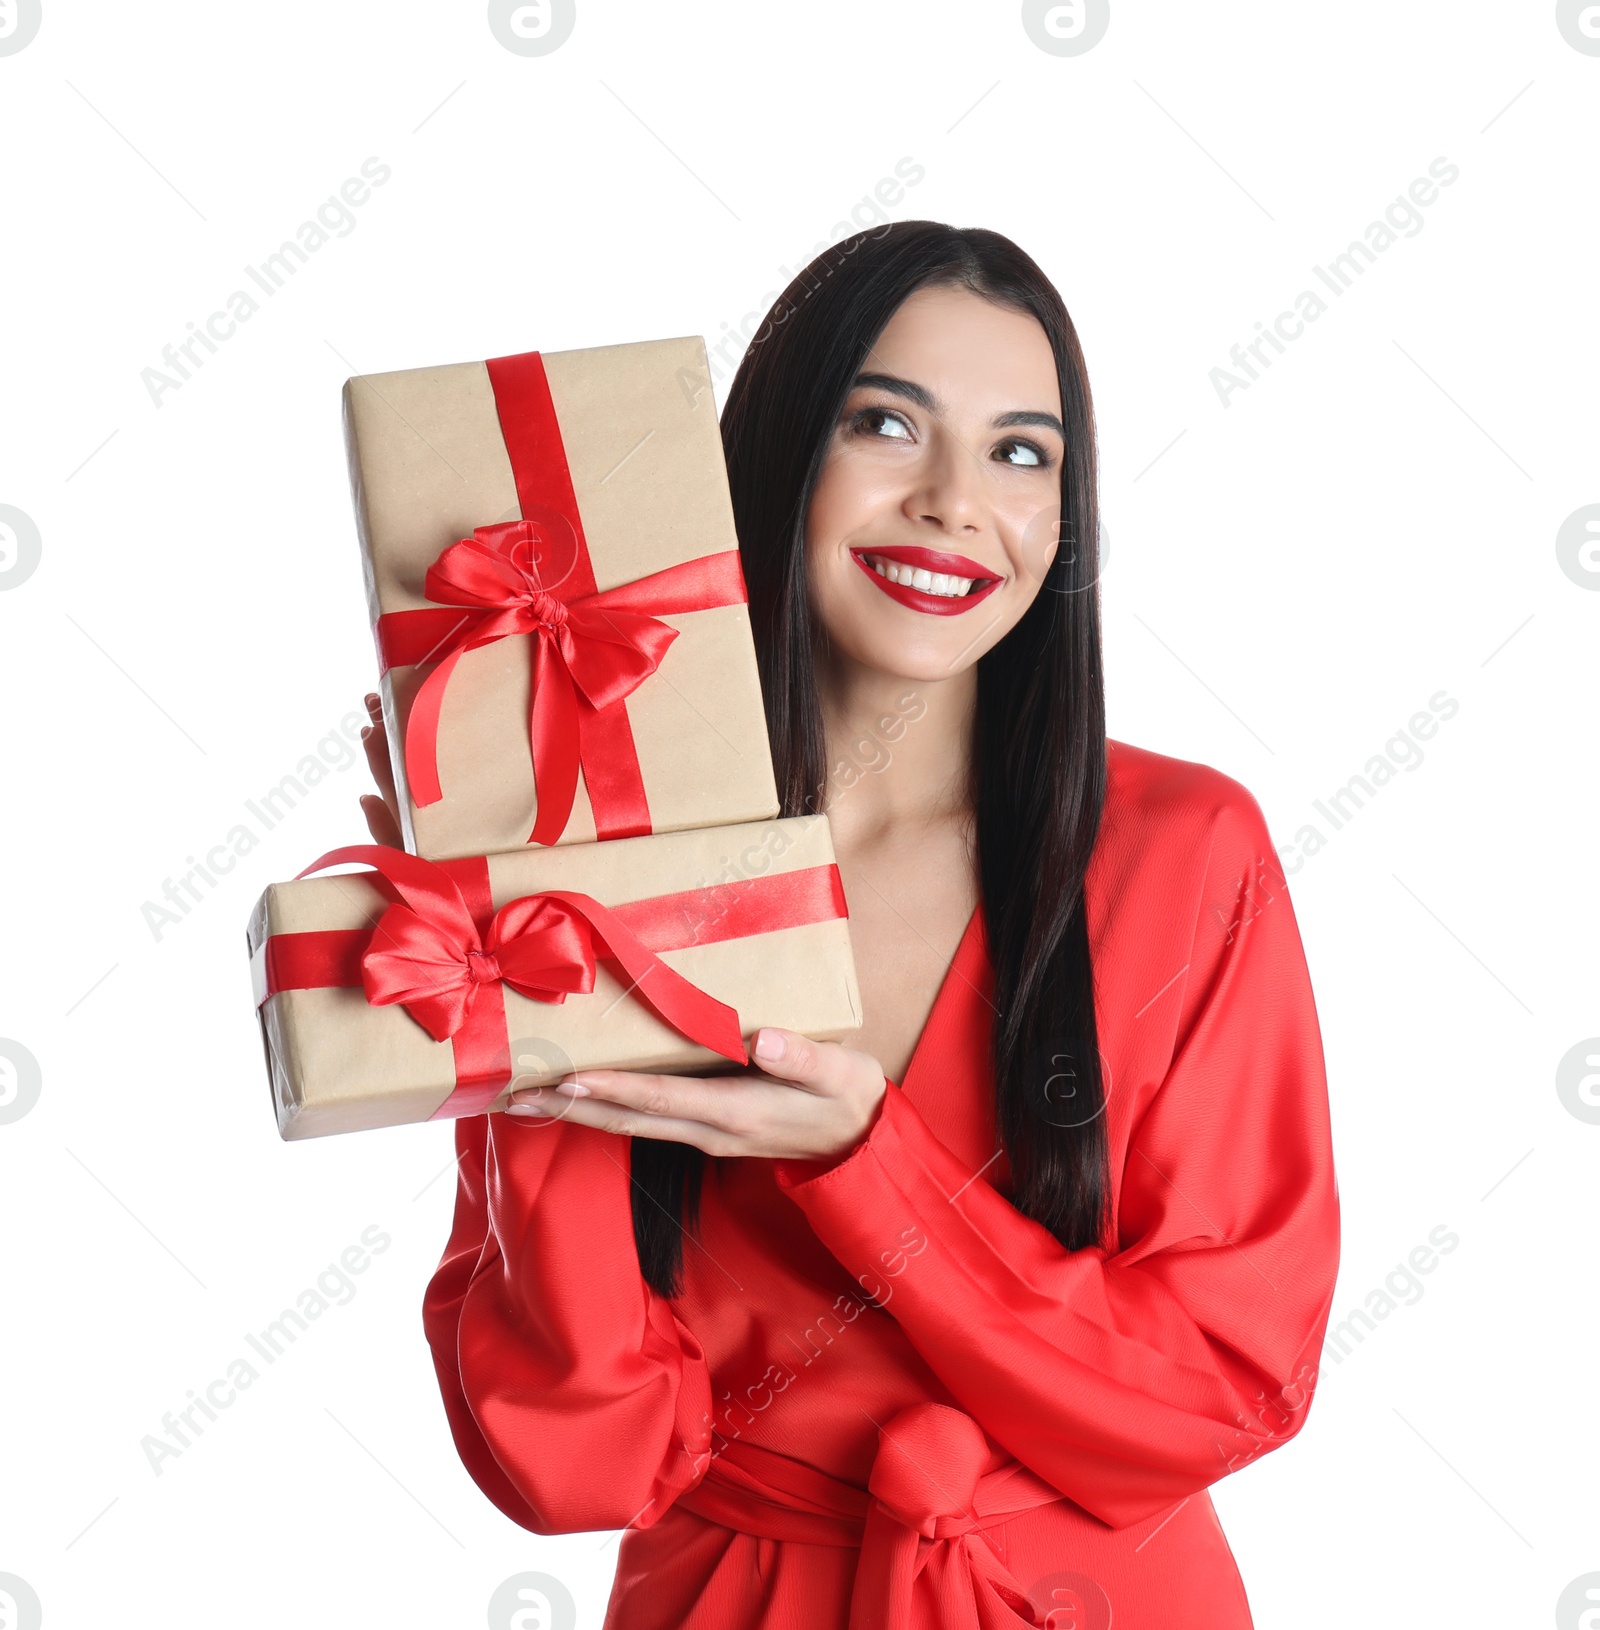 Photo of Woman in red dress holding Christmas gifts on white background